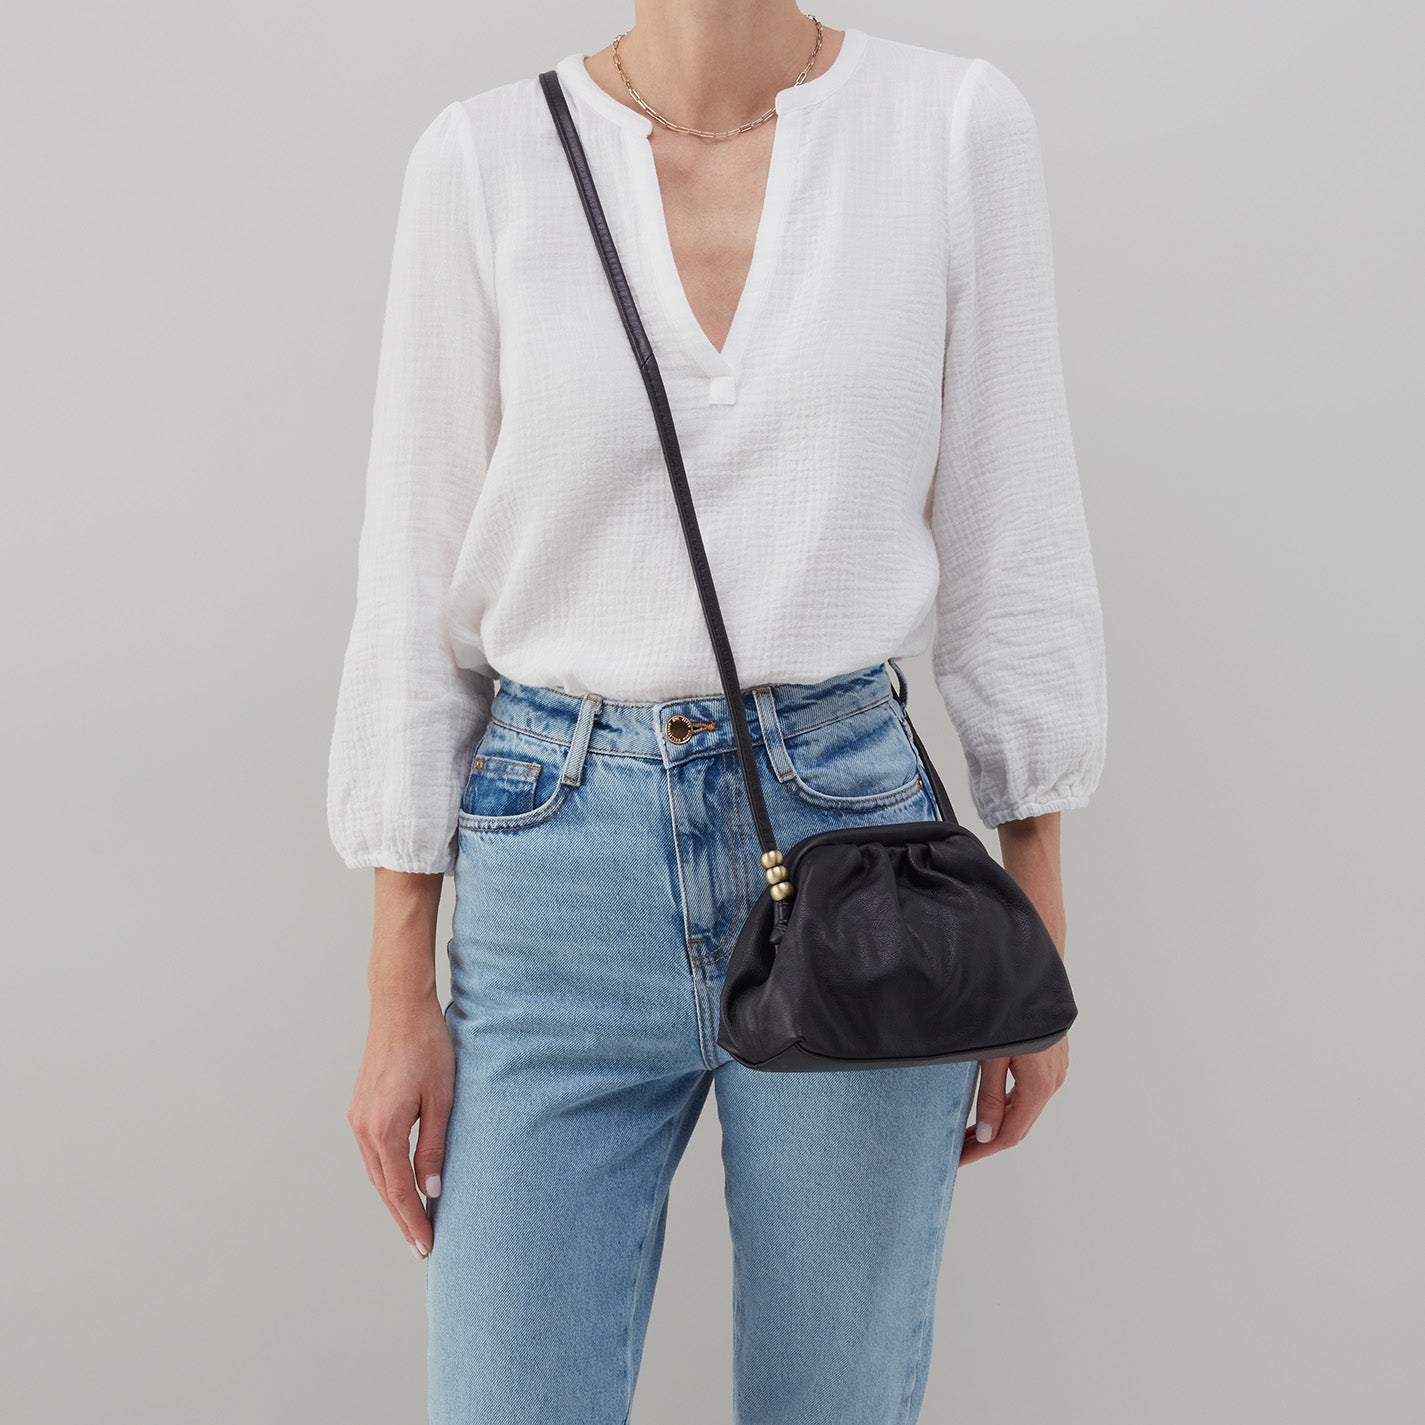 An Everyday Bag Essential: The Crossbody Bag — Art In The Find